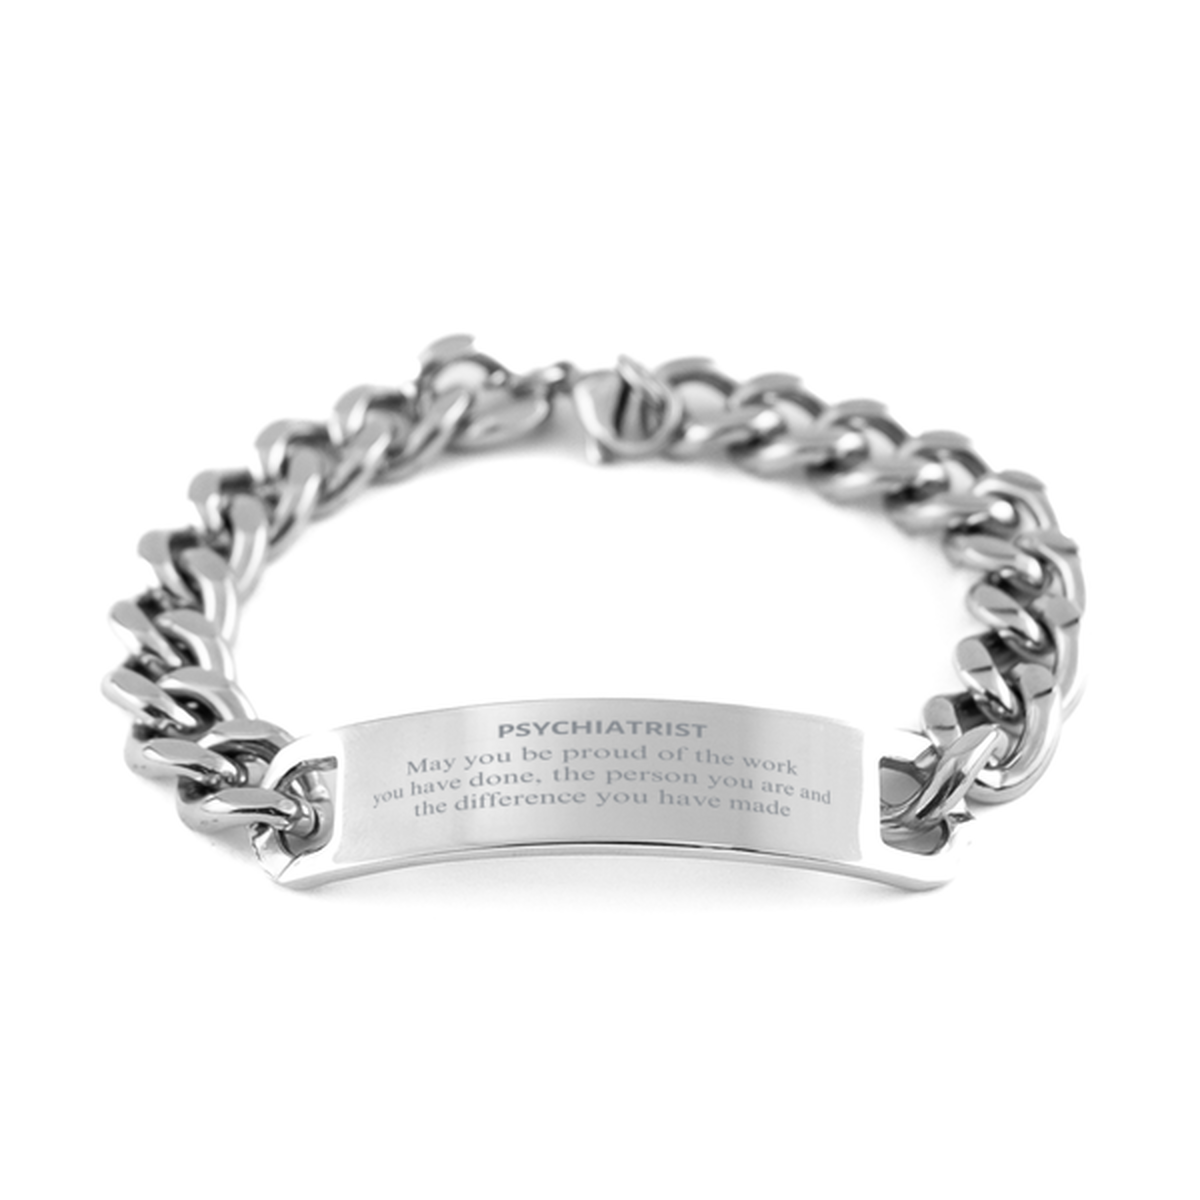 Psychiatrist May you be proud of the work you have done, Retirement Psychiatrist Cuban Chain Stainless Steel Bracelet for Colleague Appreciation Gifts Amazing for Psychiatrist